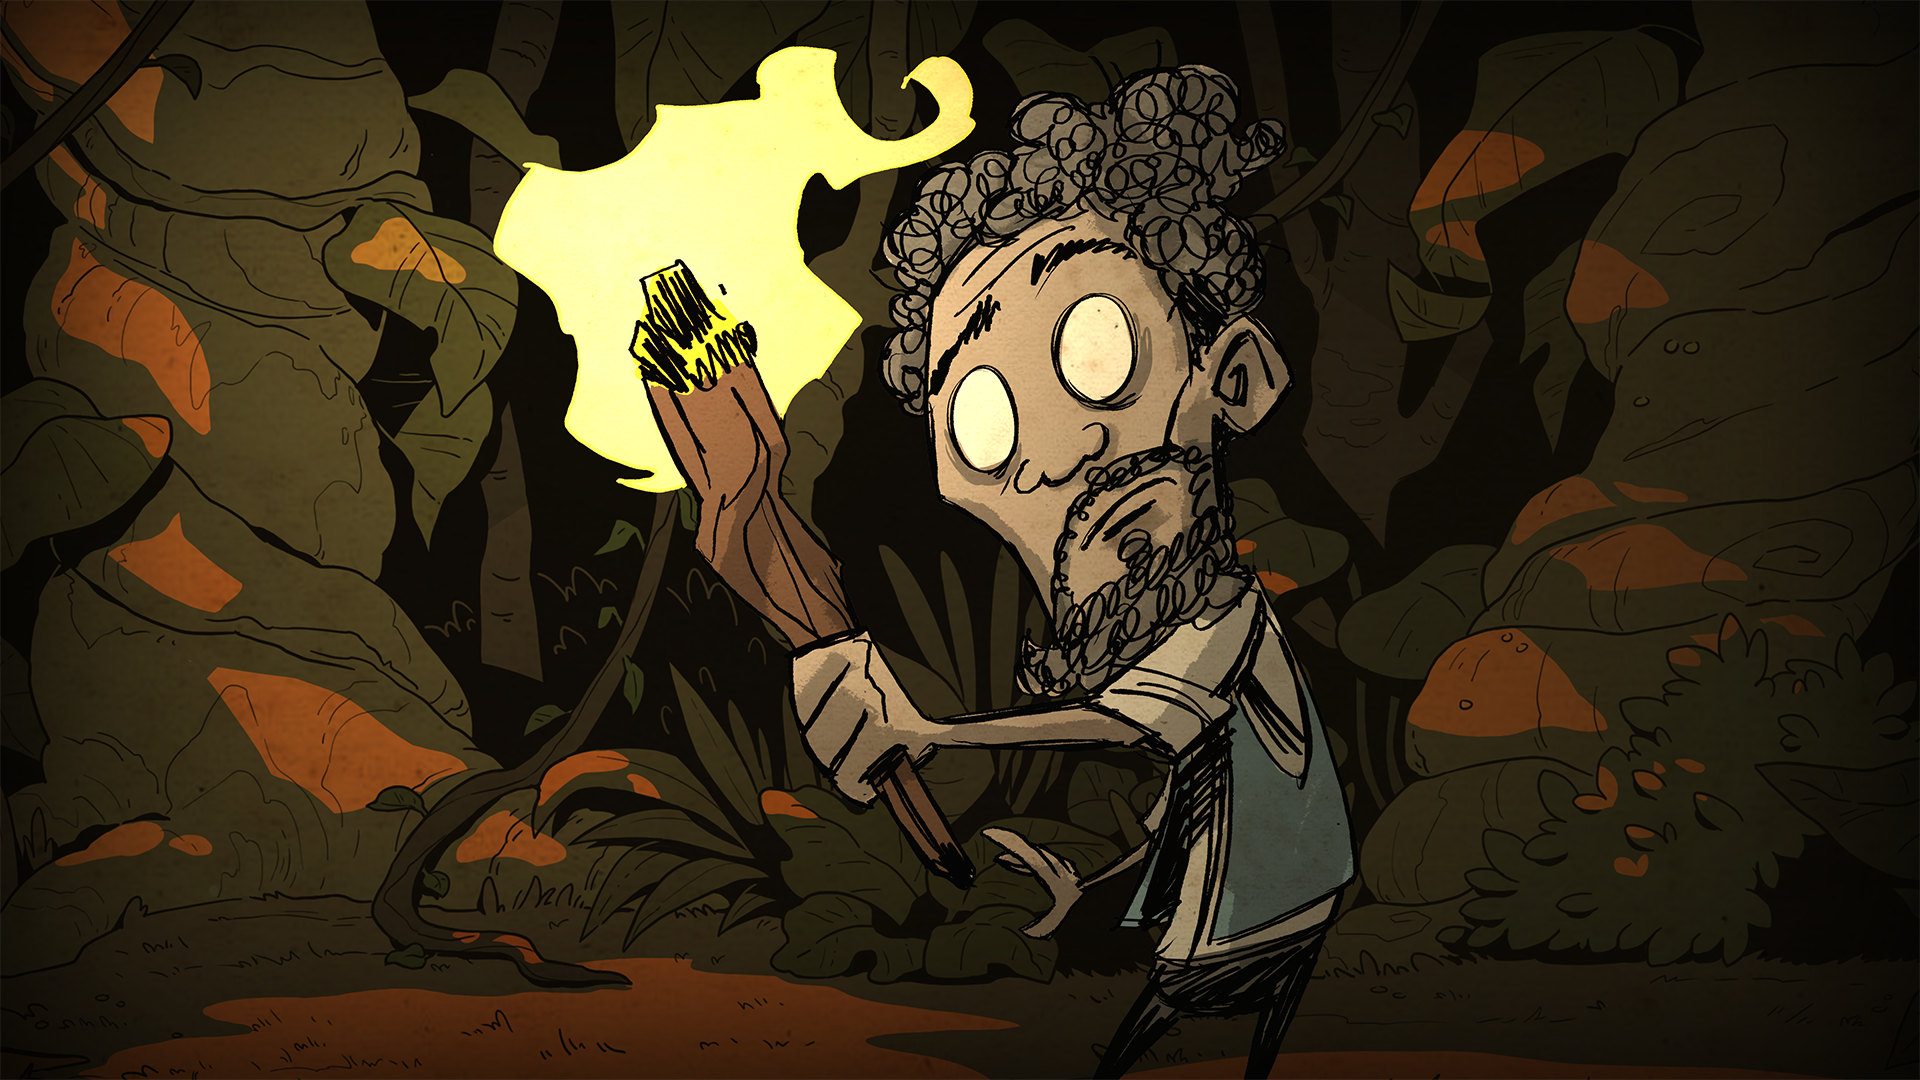 Варли донт старв. Don't Starve together Варли. Варли don't Starve арт. ДСТ don't Starve together. Dont 10